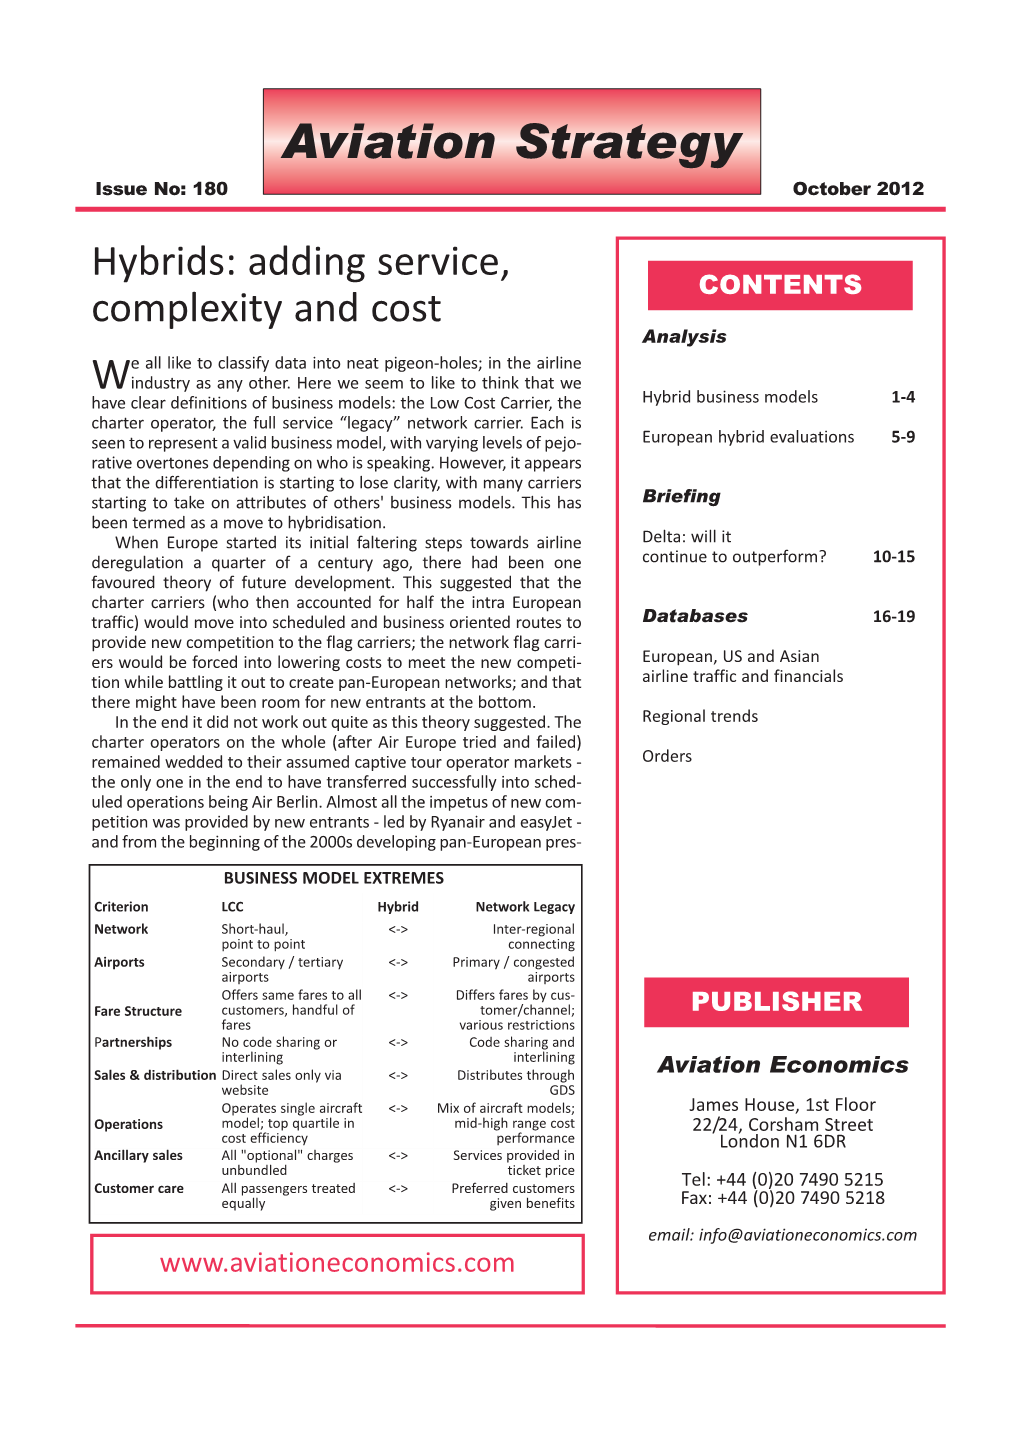 Hybrids: Adding Service, Complexity and Cost CONTENTS Analysis E All Like to Classify Data Into Neat Pigeon-Holes; in the Airline Windustry As Any Other